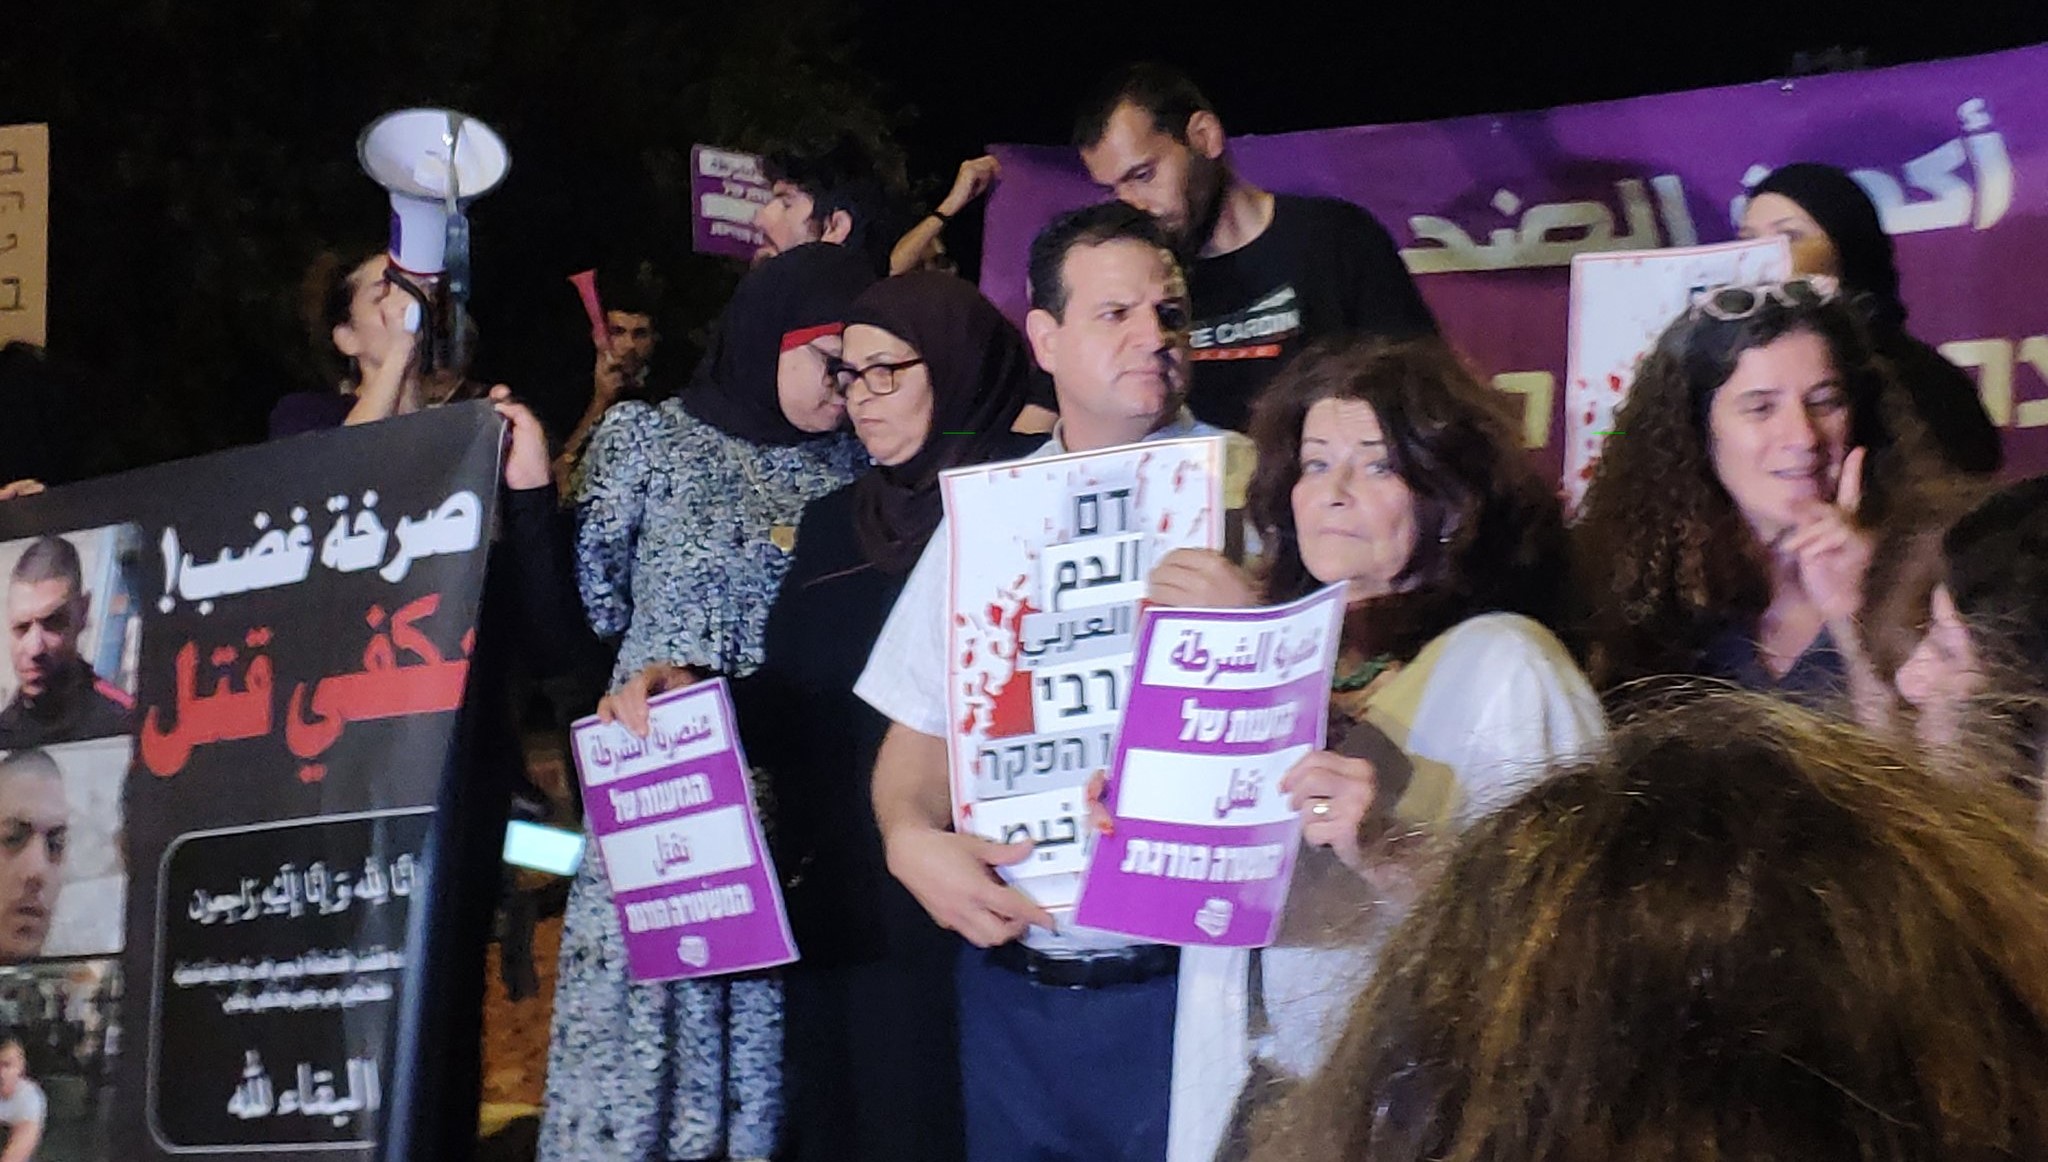 Citizens demonstrate against the escalating violence and crime in Israel's Arab communities outside of Public Security Minister Omer Bar-Lev's home in the town of Kokhav Ya'ir on Saturday night, September 25. In the center is MK Ayman Odeh, chair of the Joint List.